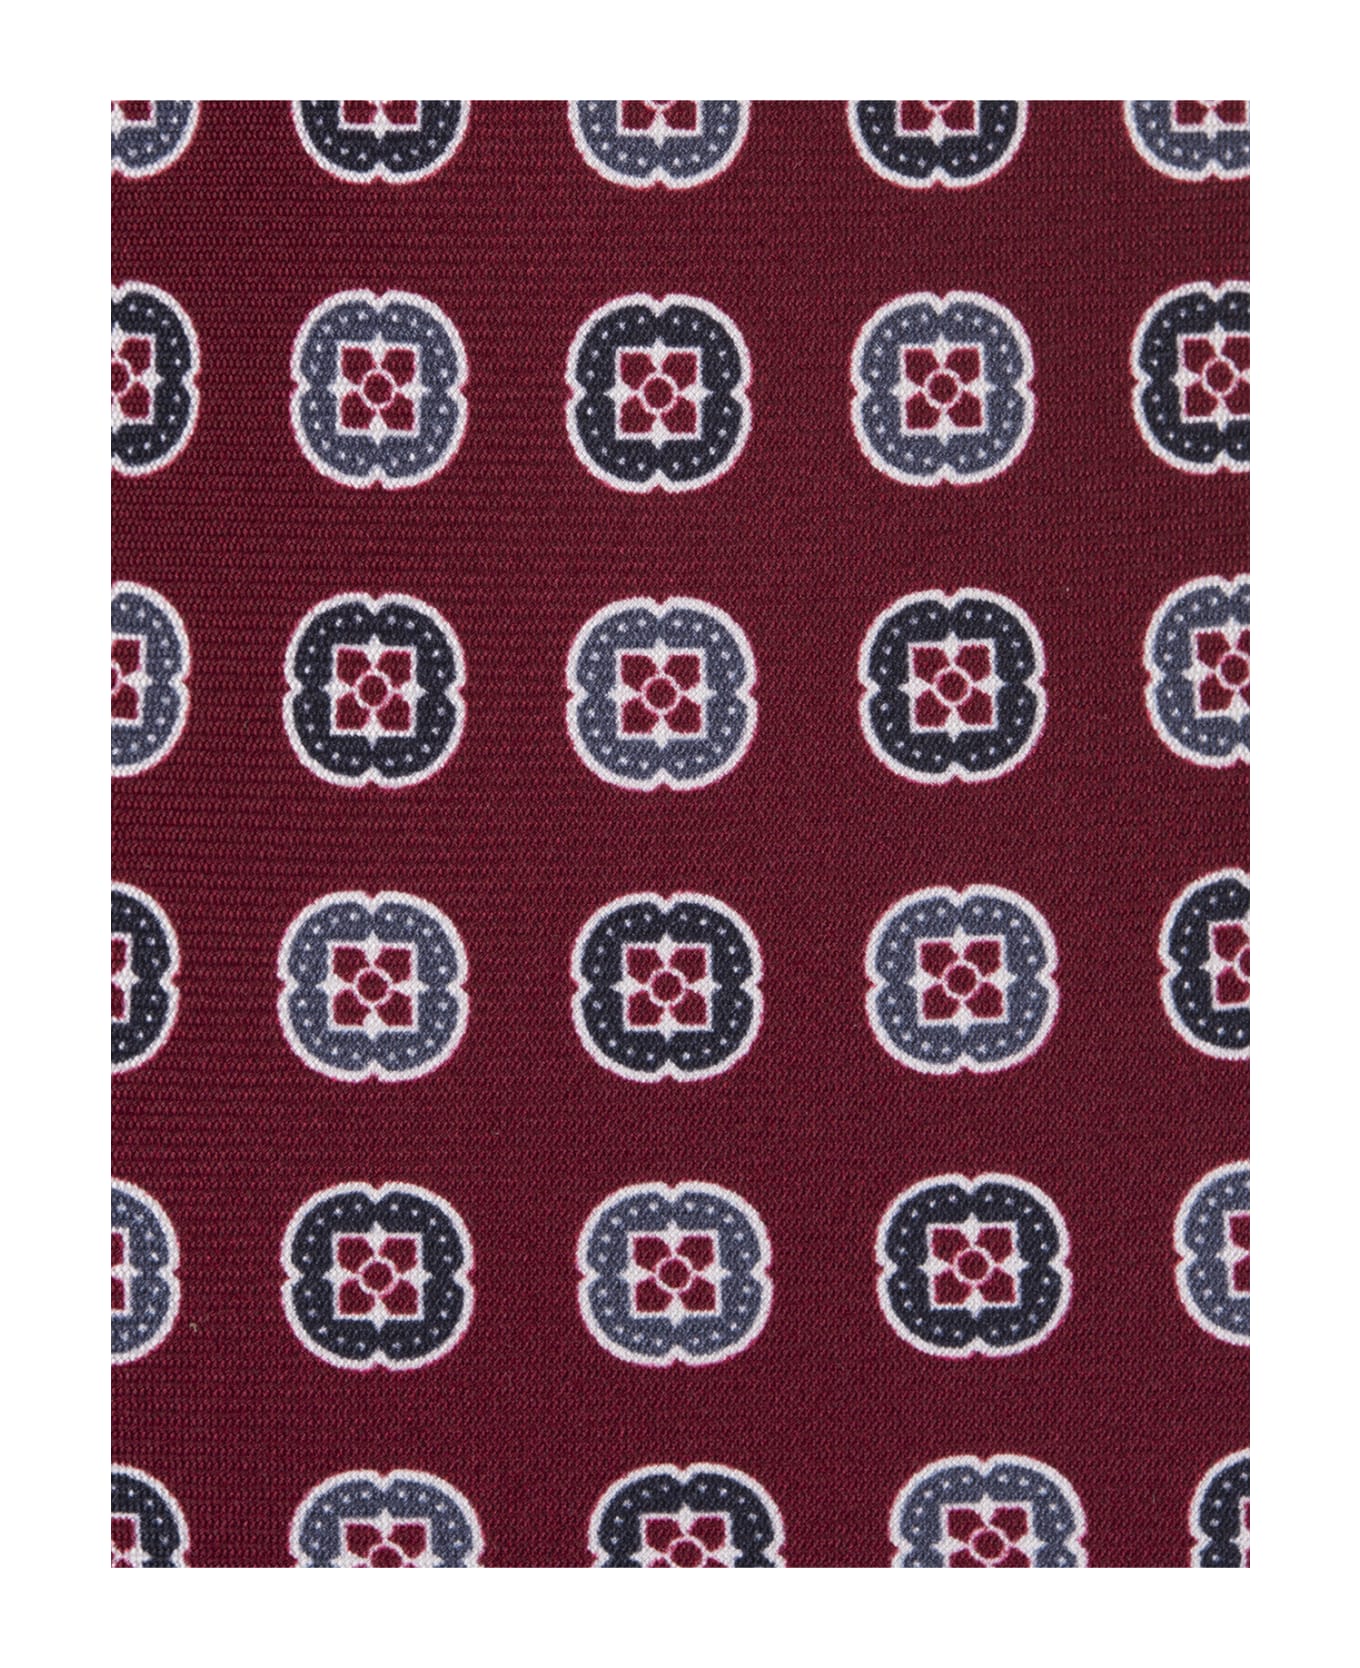 Kiton Burgundy Tie With Pattern - Red